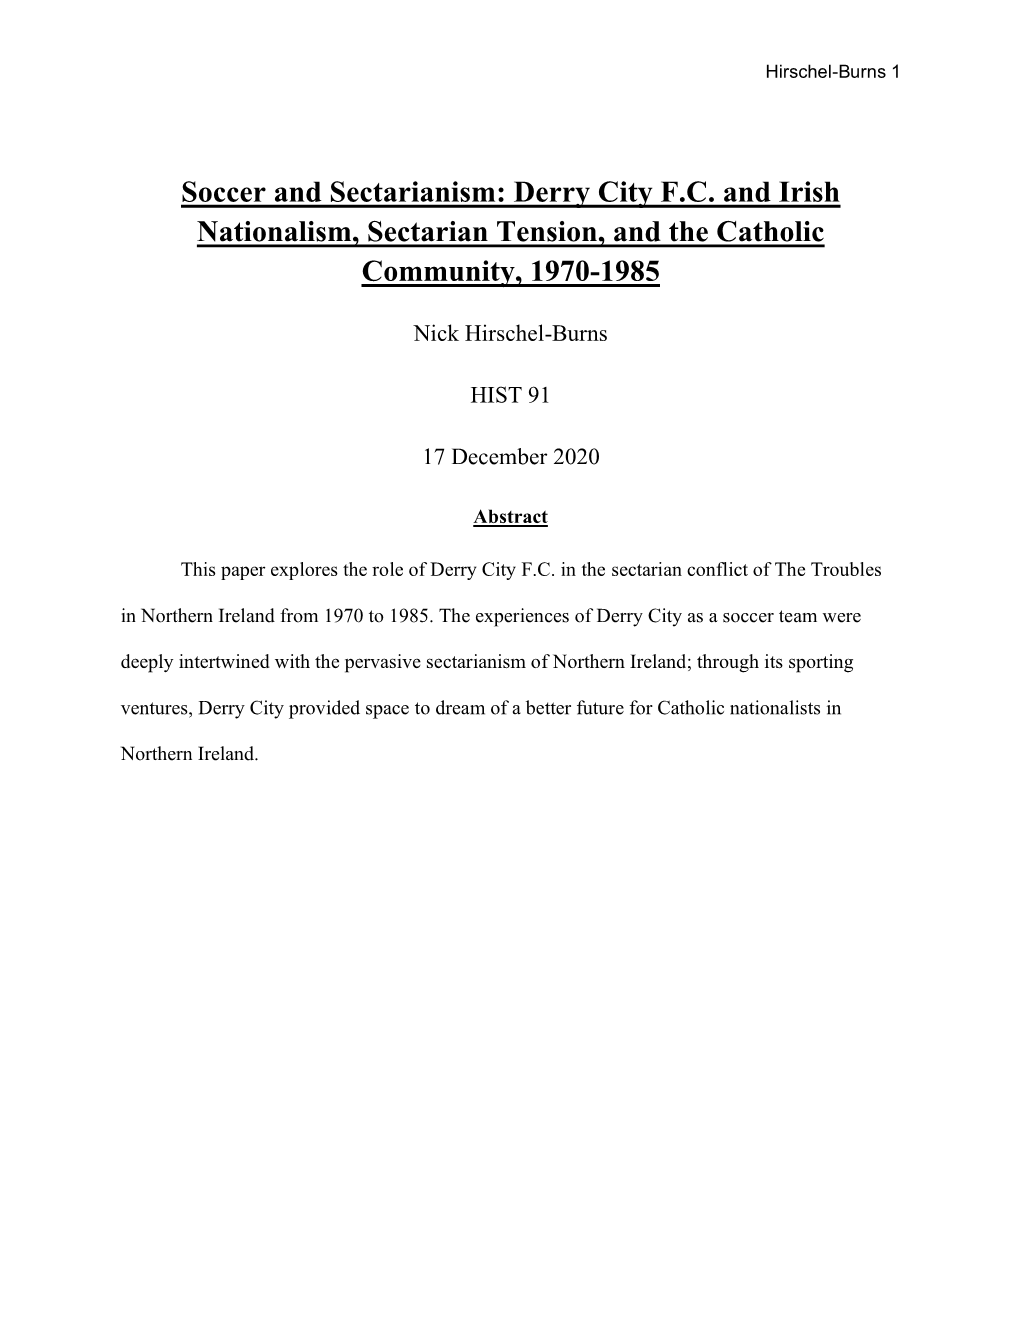 Derry City FC and Irish Nationalism, Sectarian Tension, and the Catholic